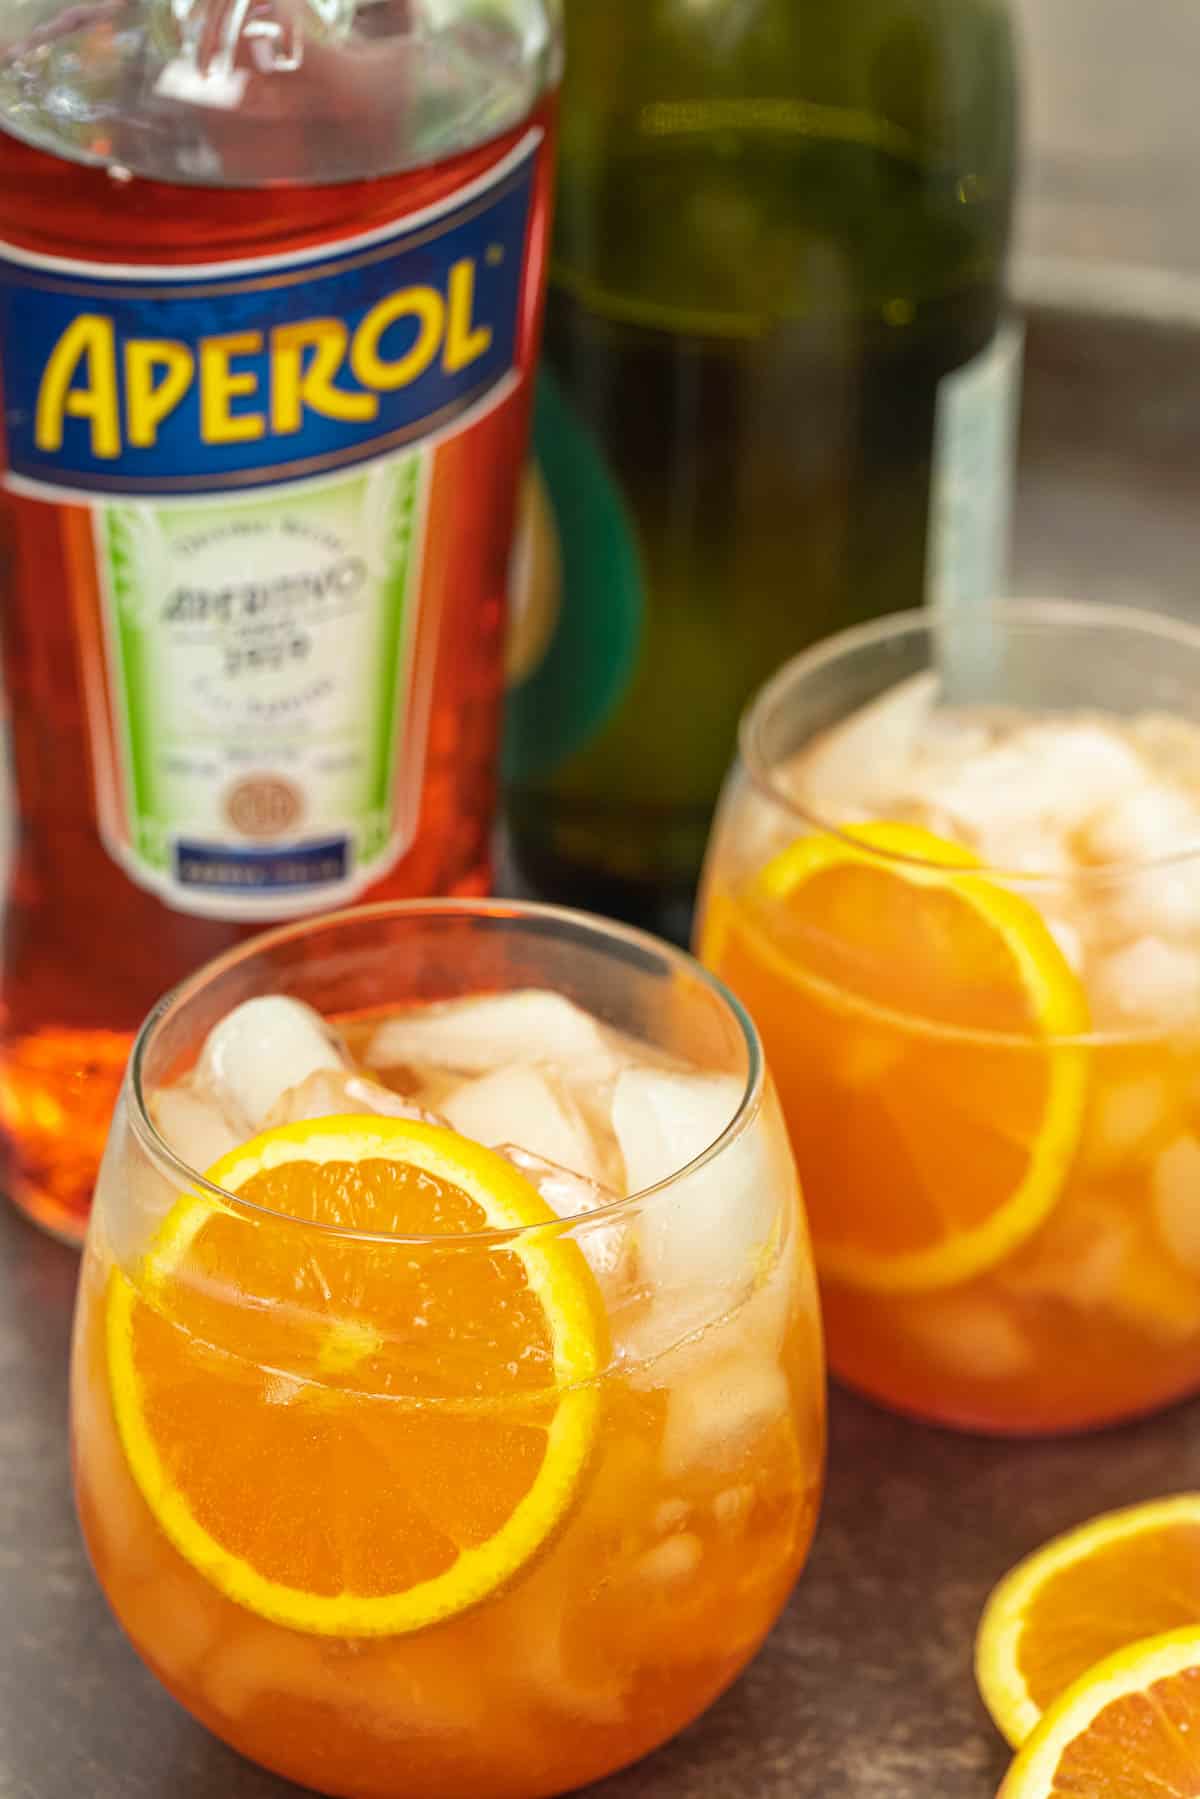 How to Make A Classic Aperol Spritz Aperitif Cocktail - A Feast For The Eyes